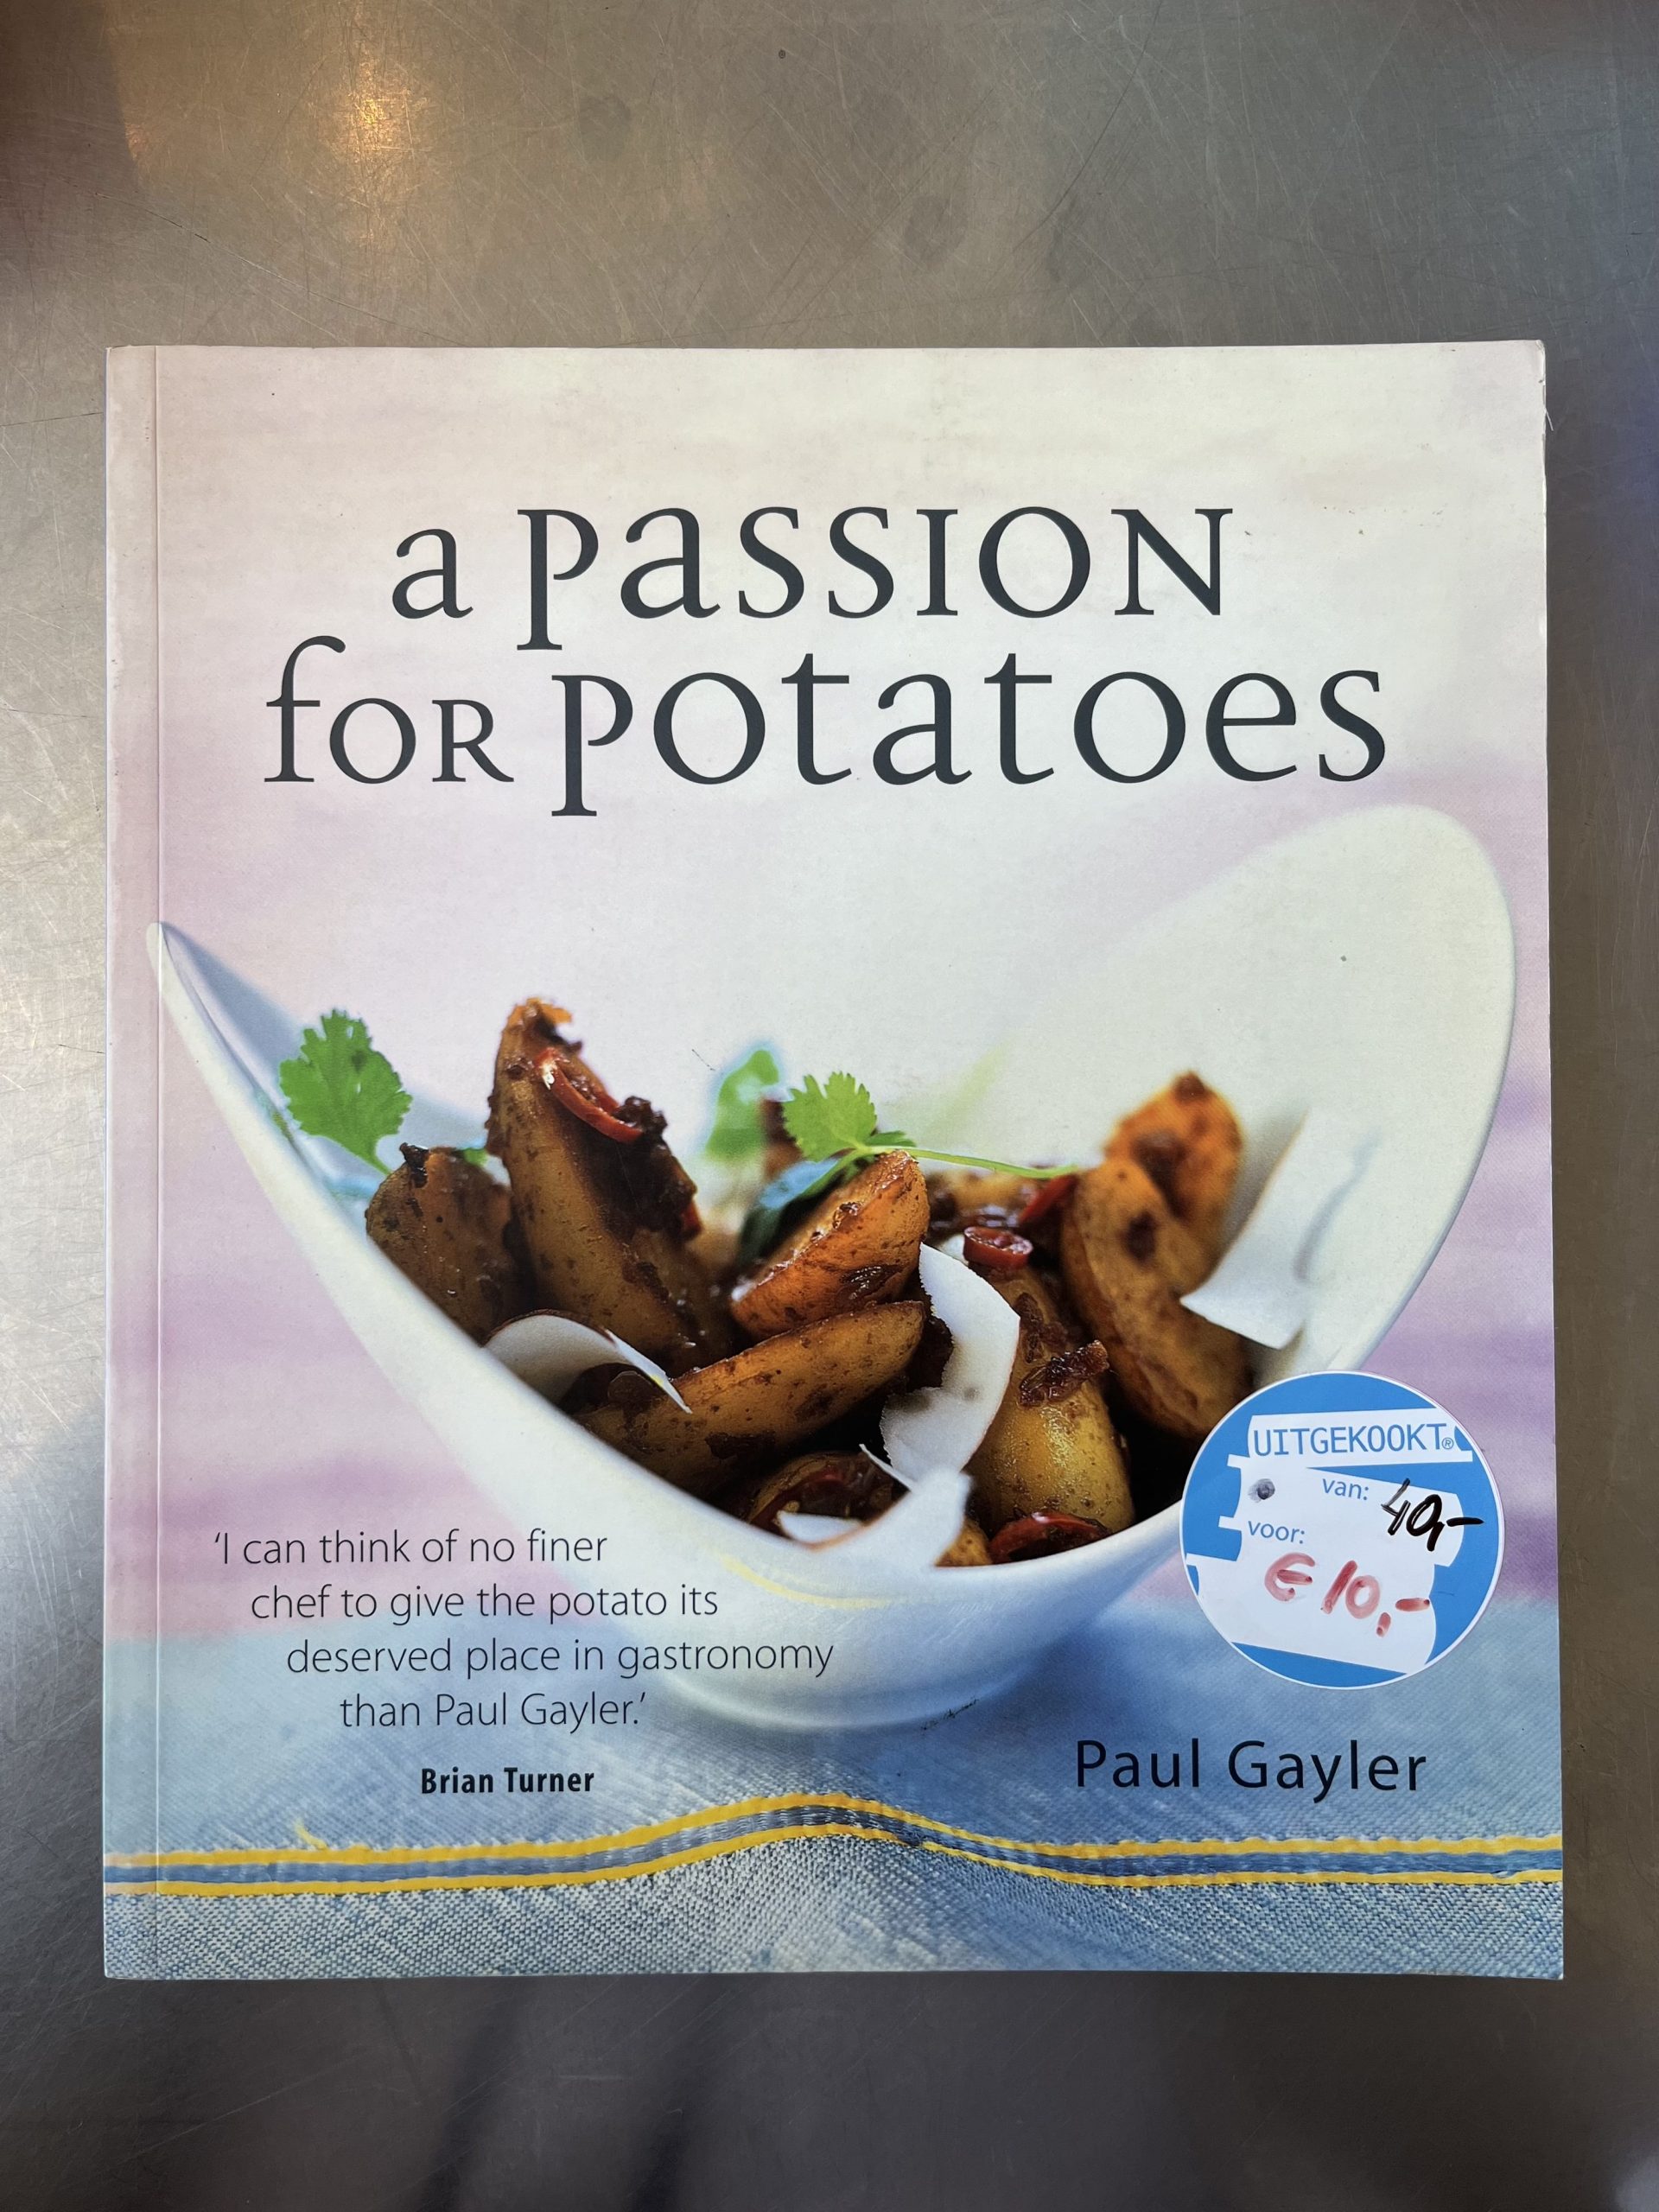 A passion for potatoes